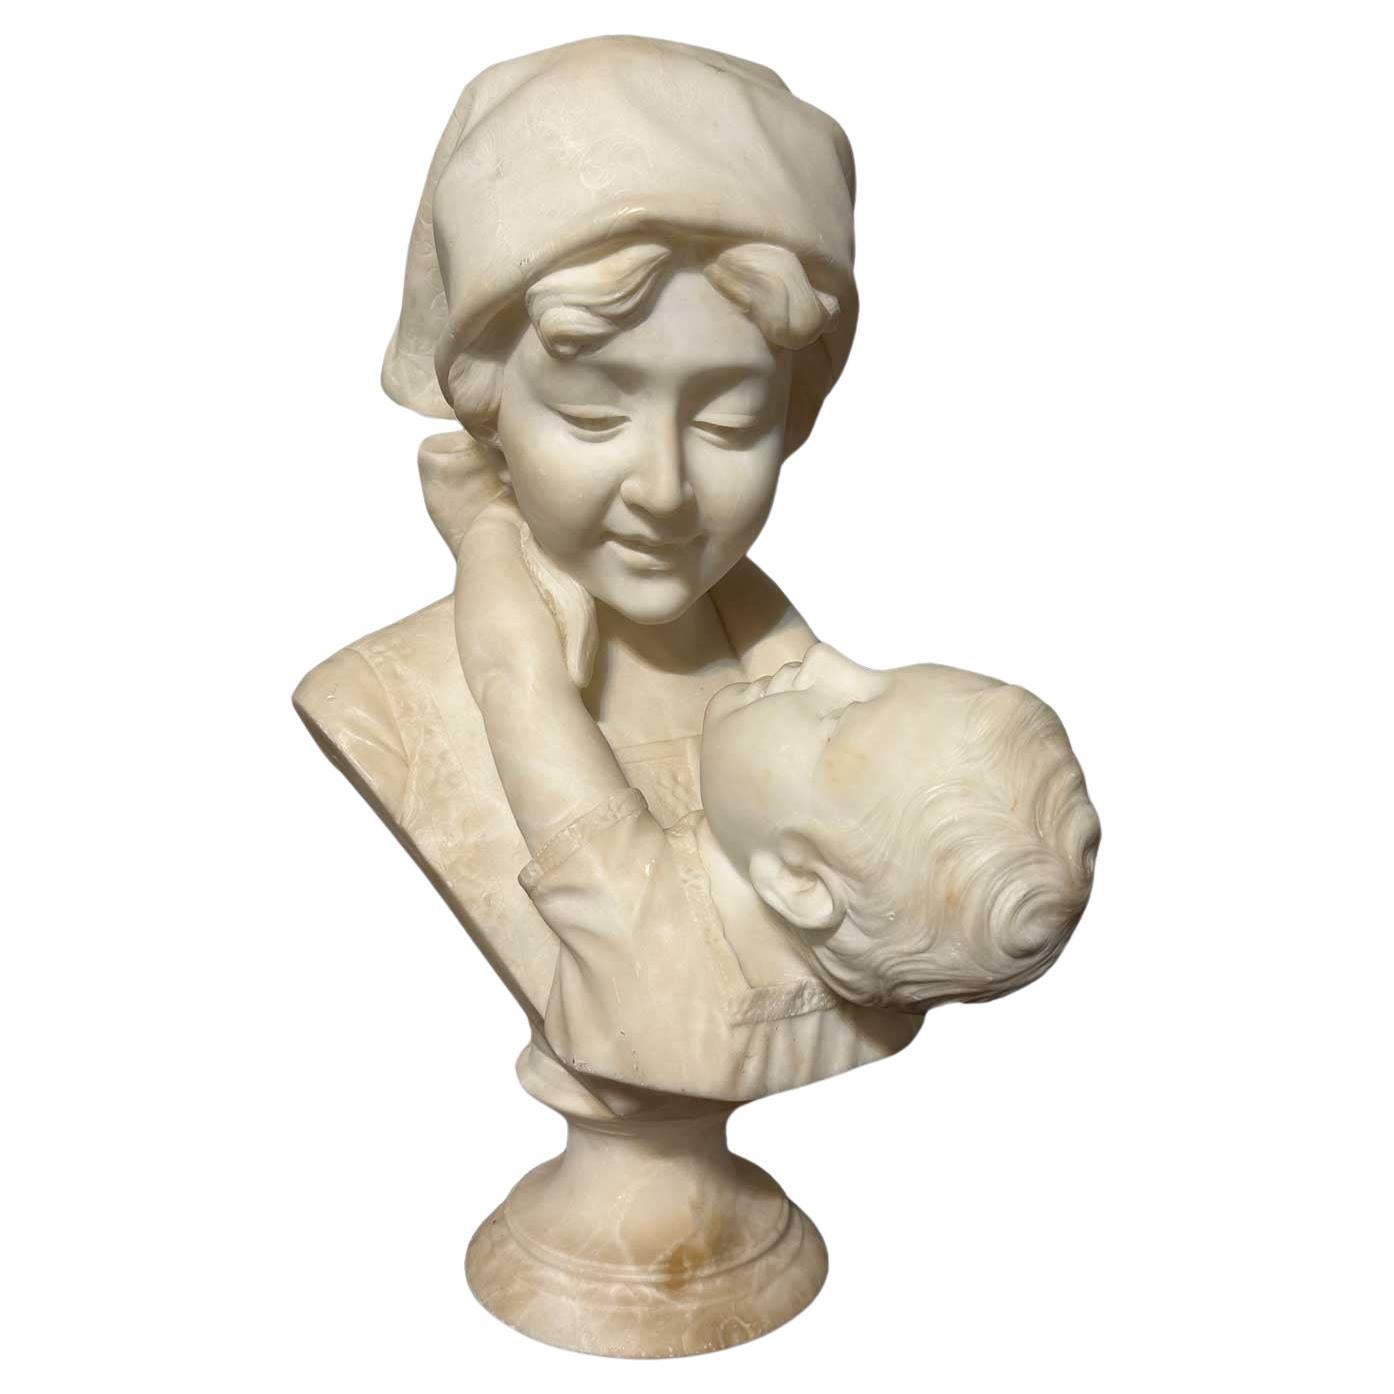 19th CENTURY MARBLE SCULPTURE "THE HUG BETWEEN MOTHER AND SON" 